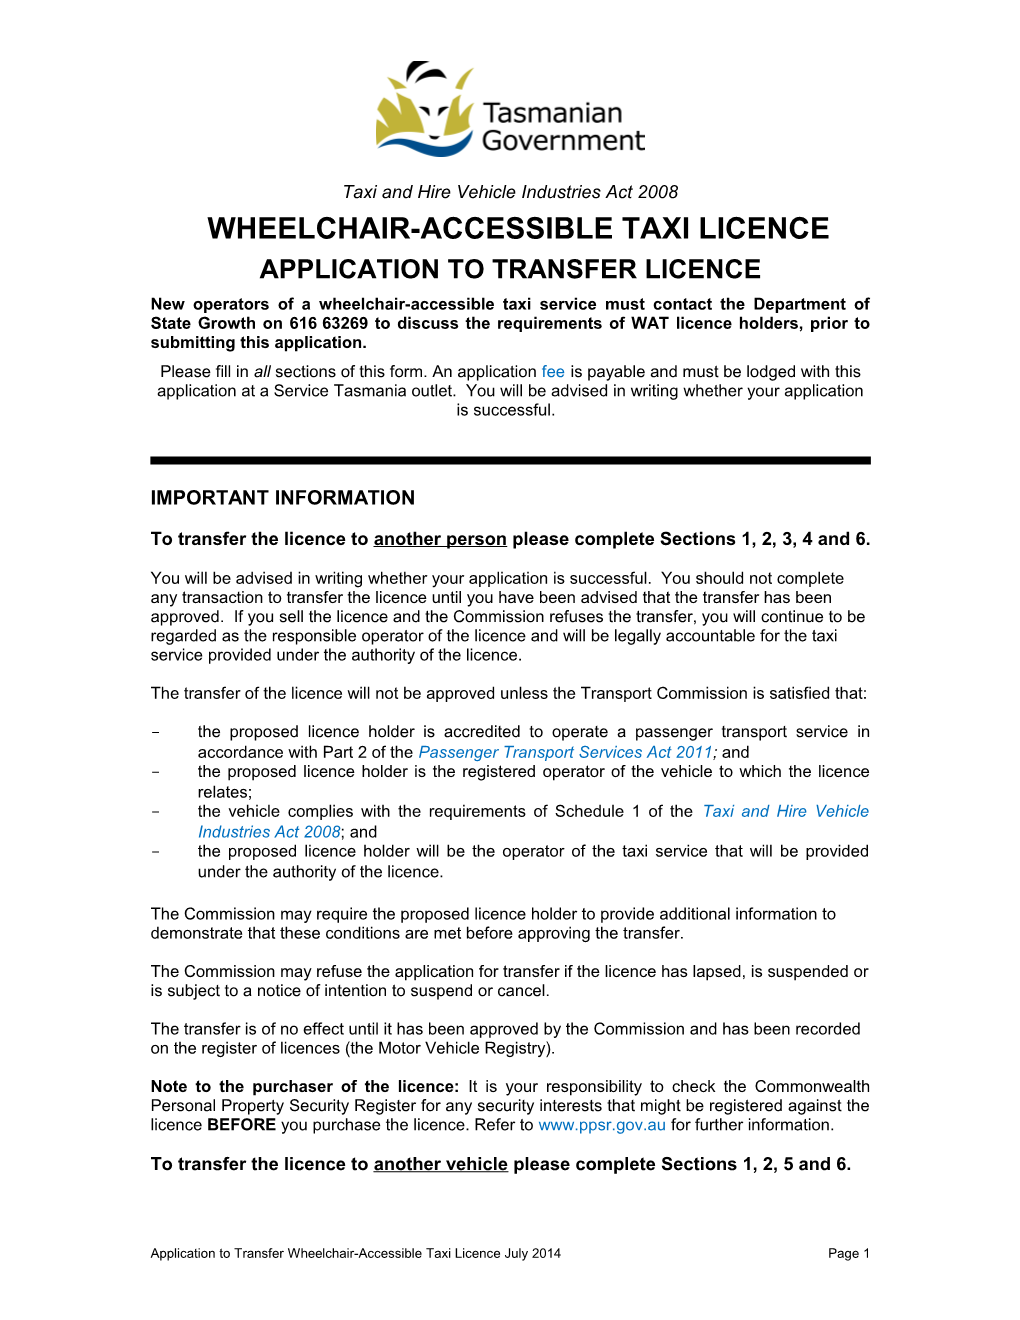 Taxi and Luxury Hire Car Industries Act 2008